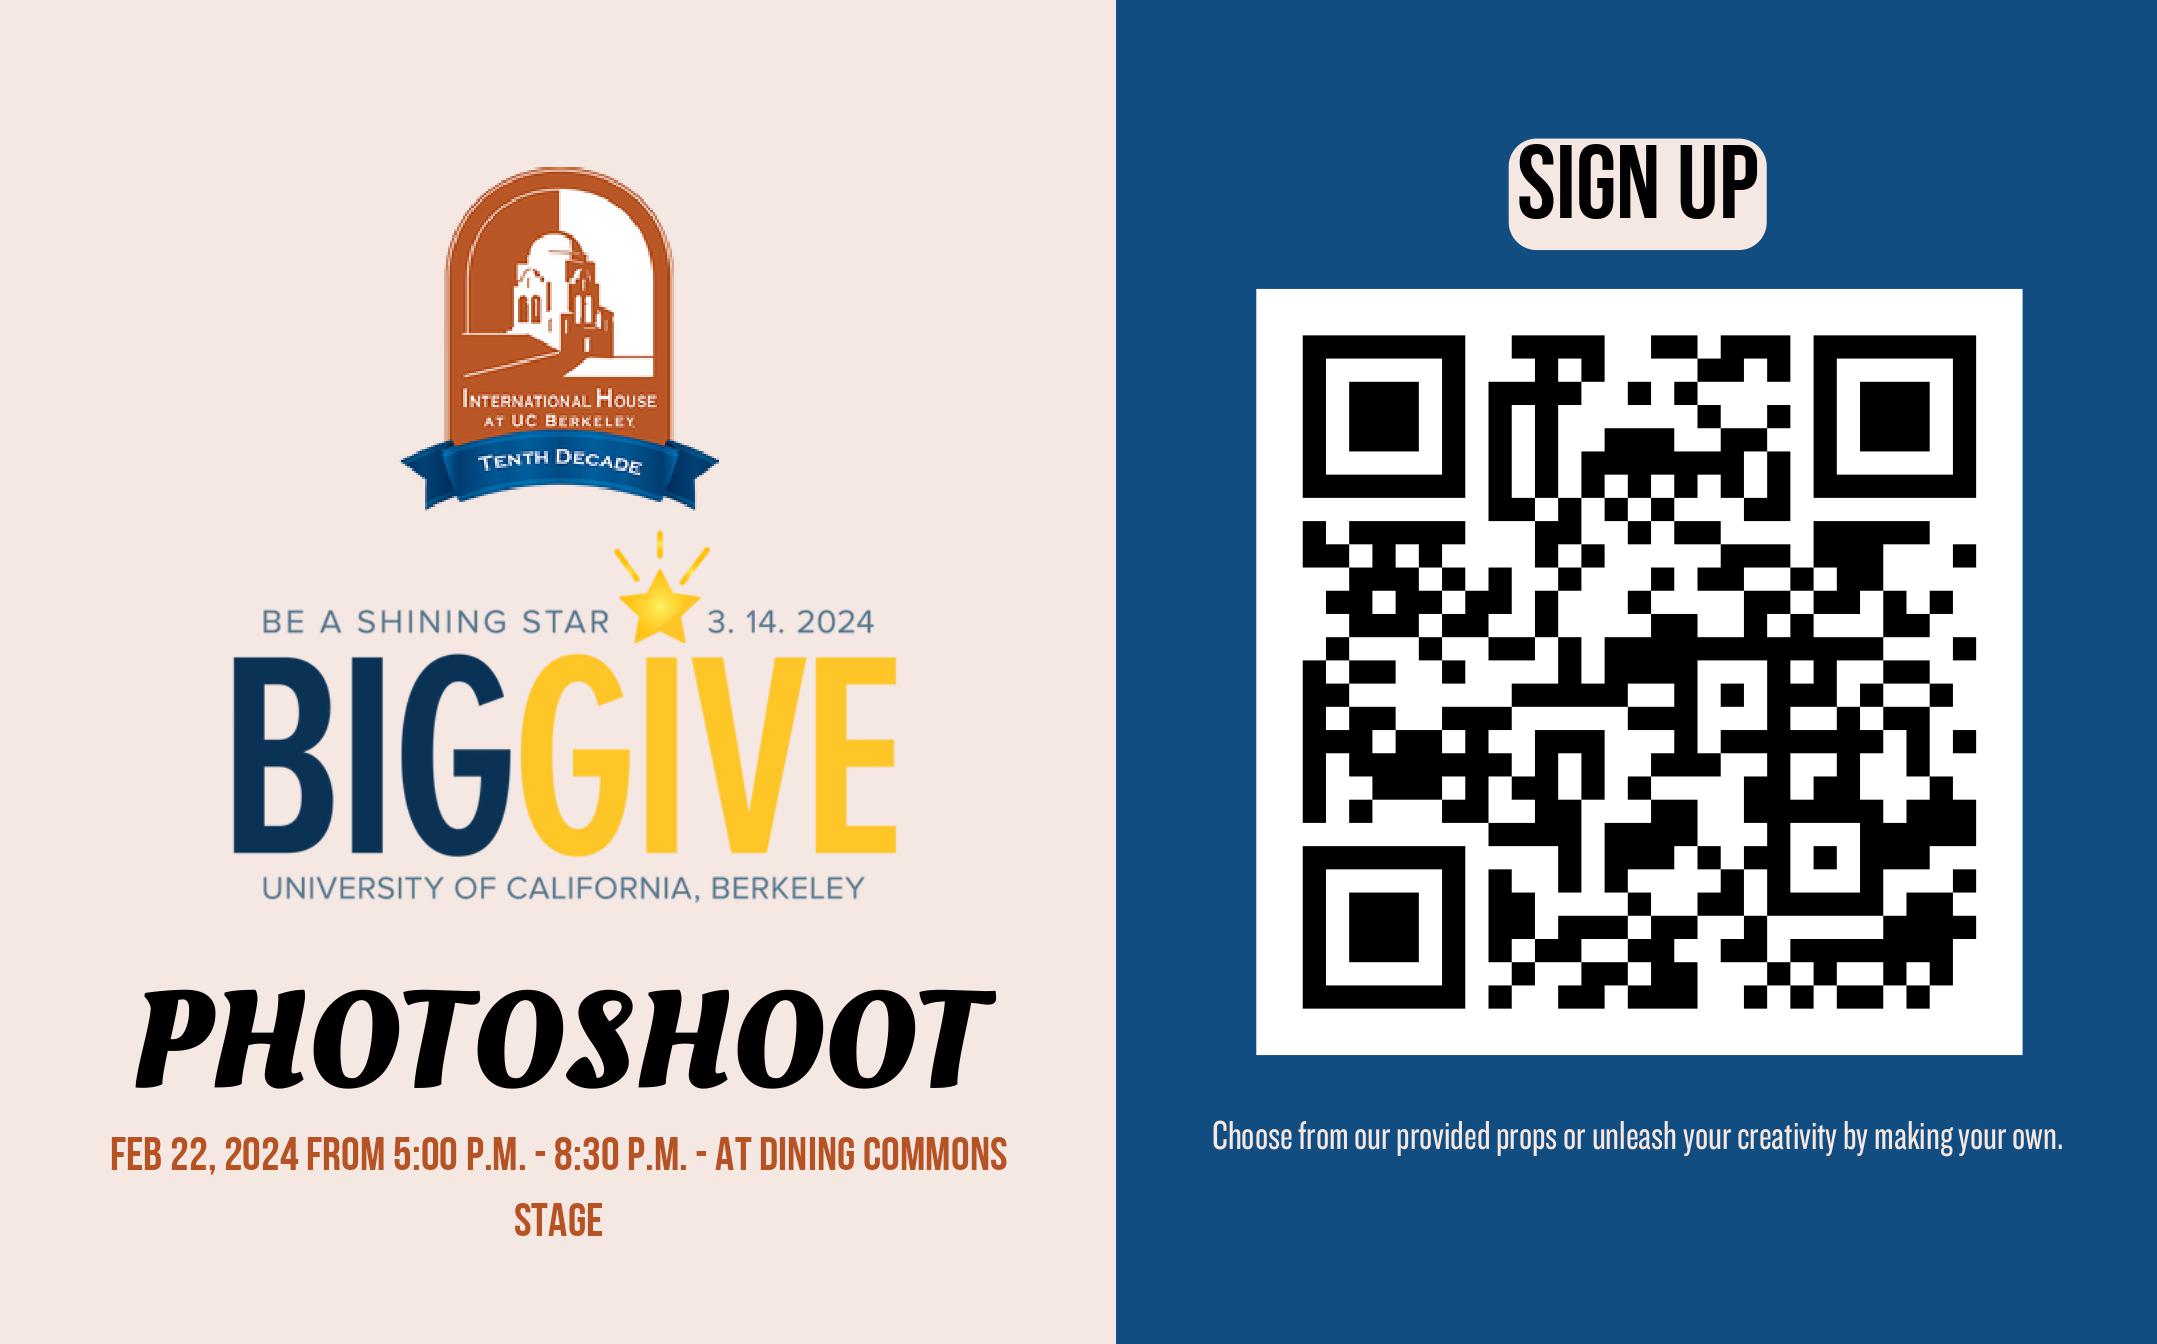 A poster for the Big Give photoshoot with accompanying QR code.